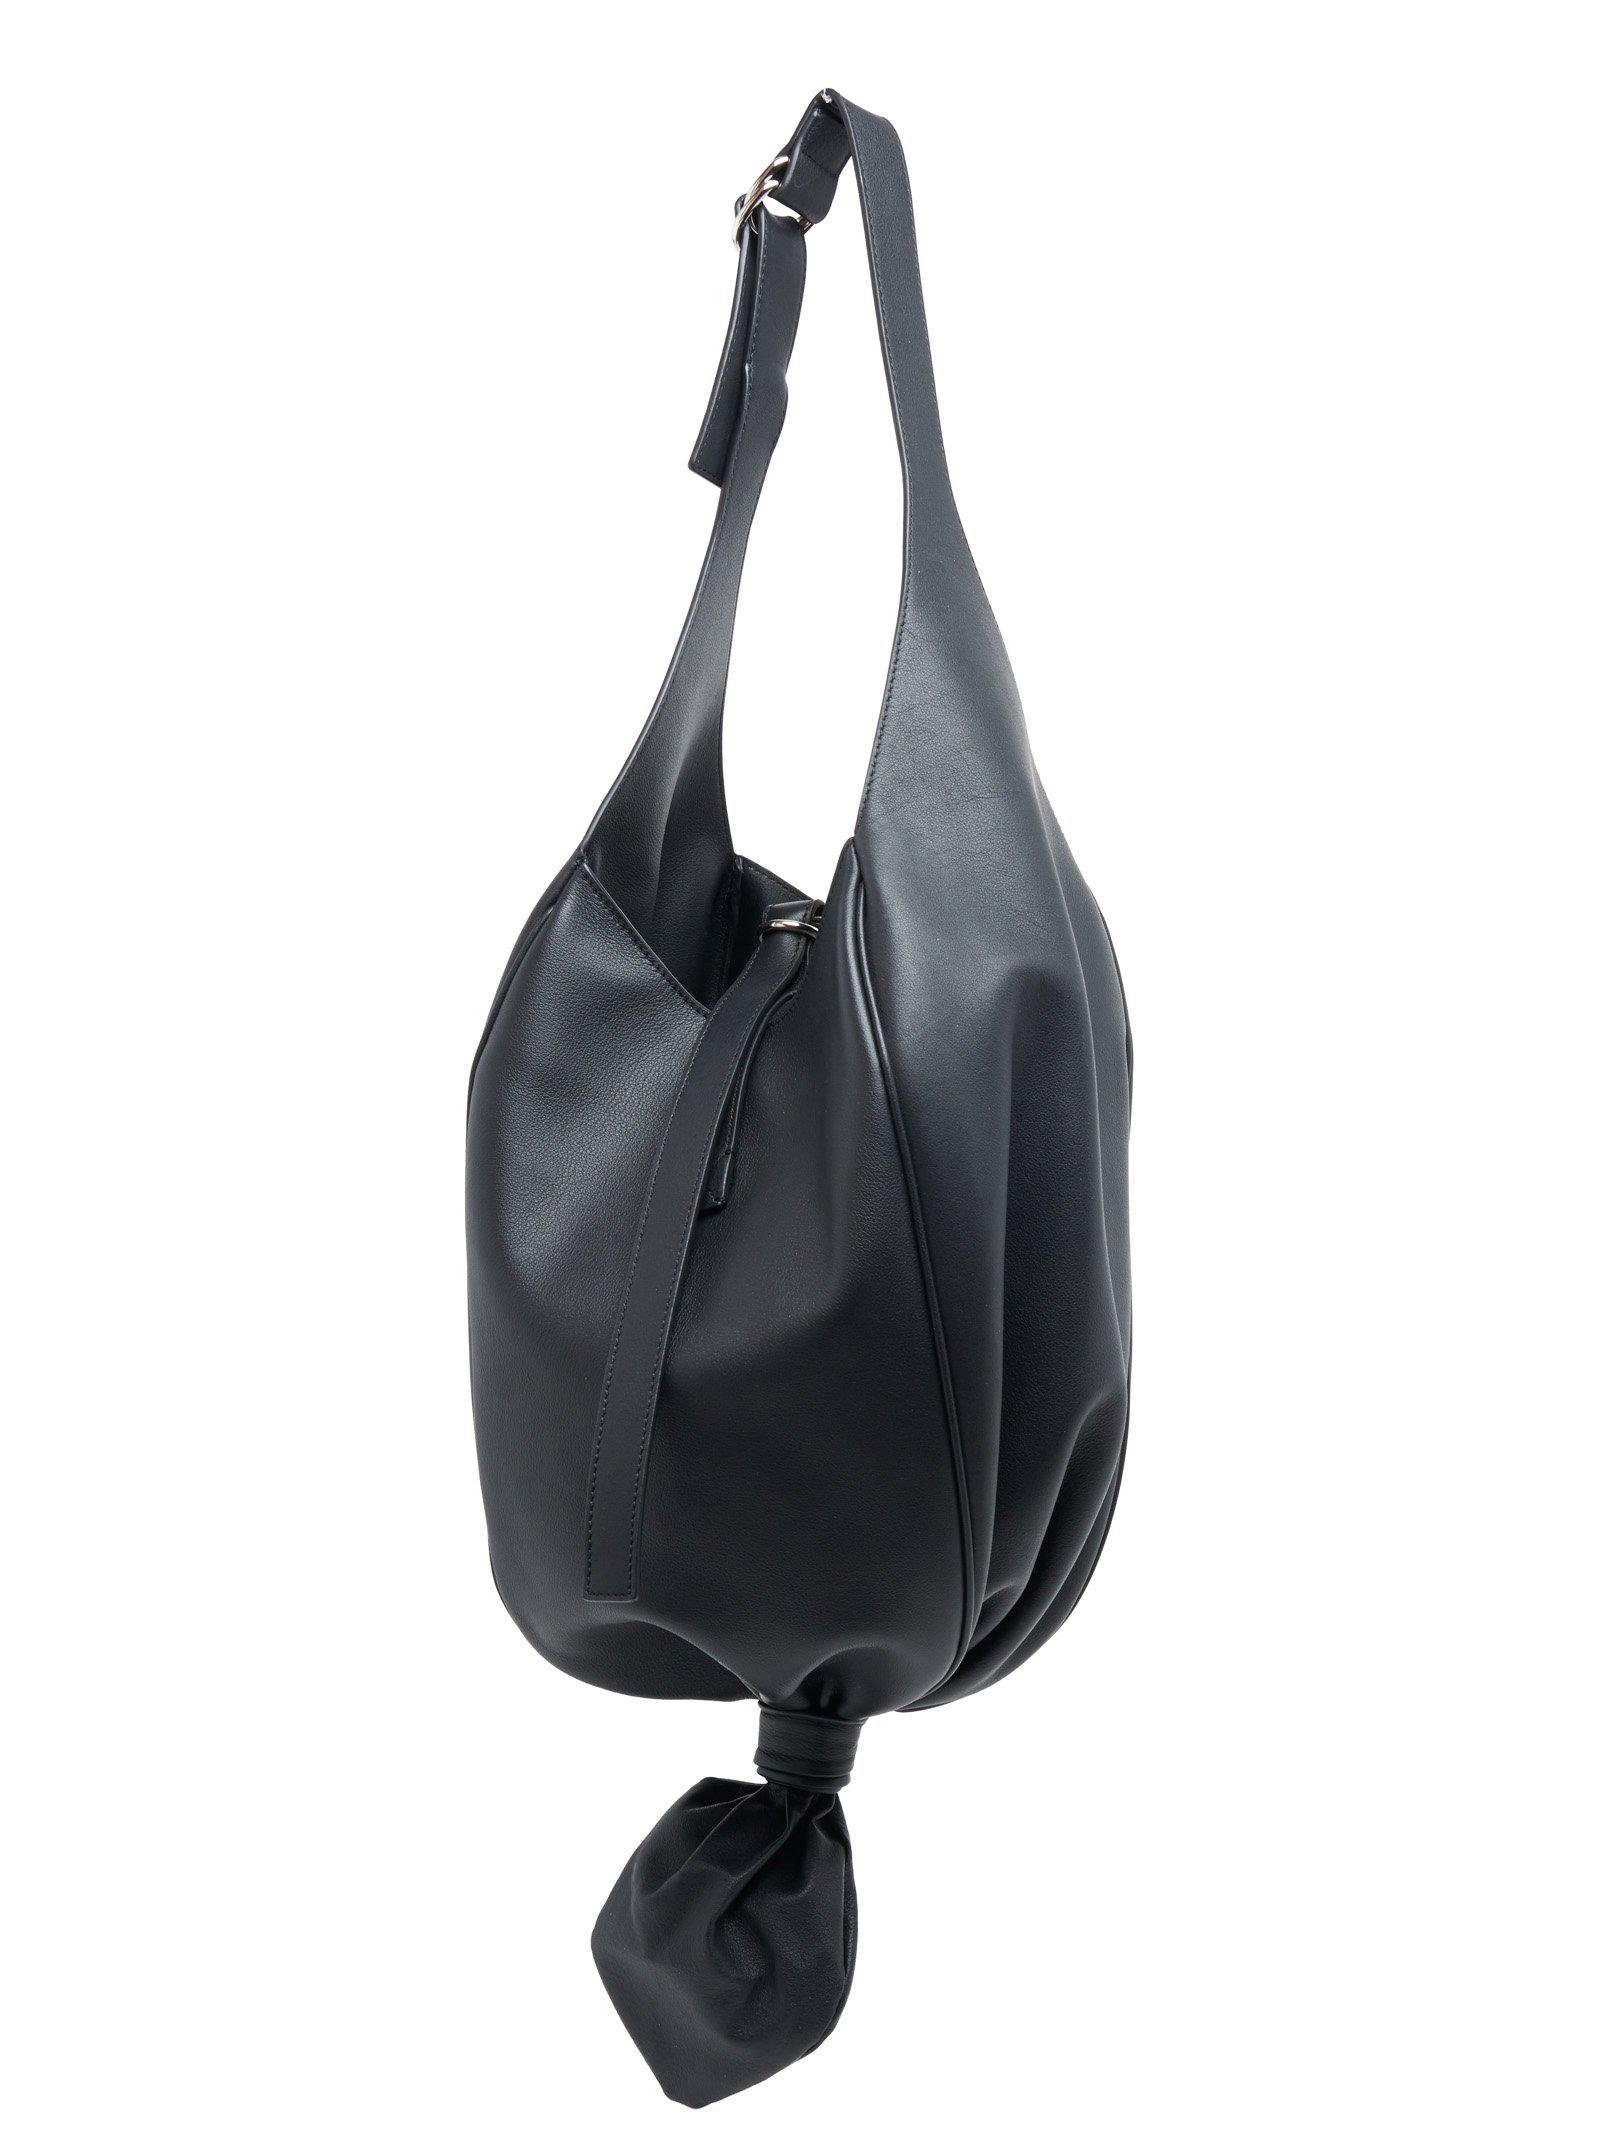 JW Anderson Leather Knot Hobo Bag in Black - Lyst